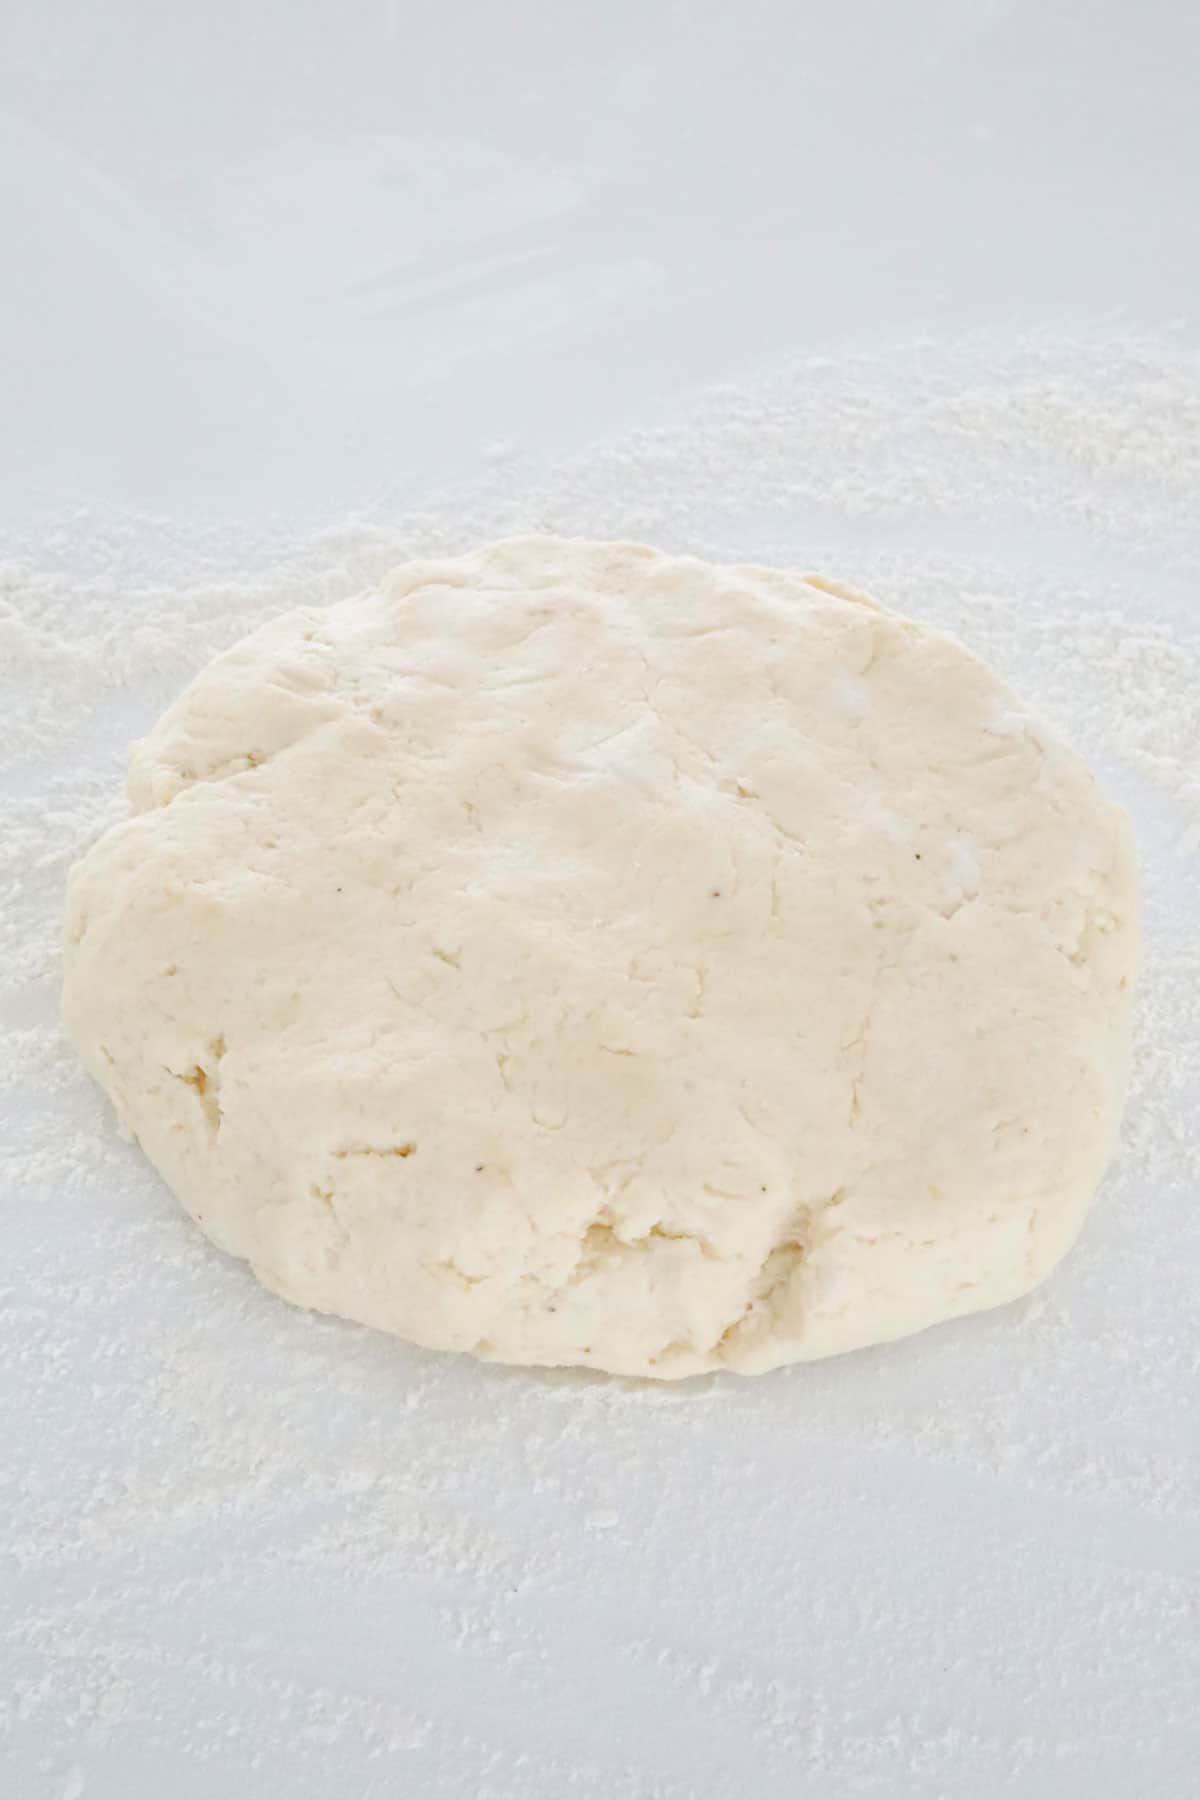 Dough shaped in to a disc on a lghtly floured board.